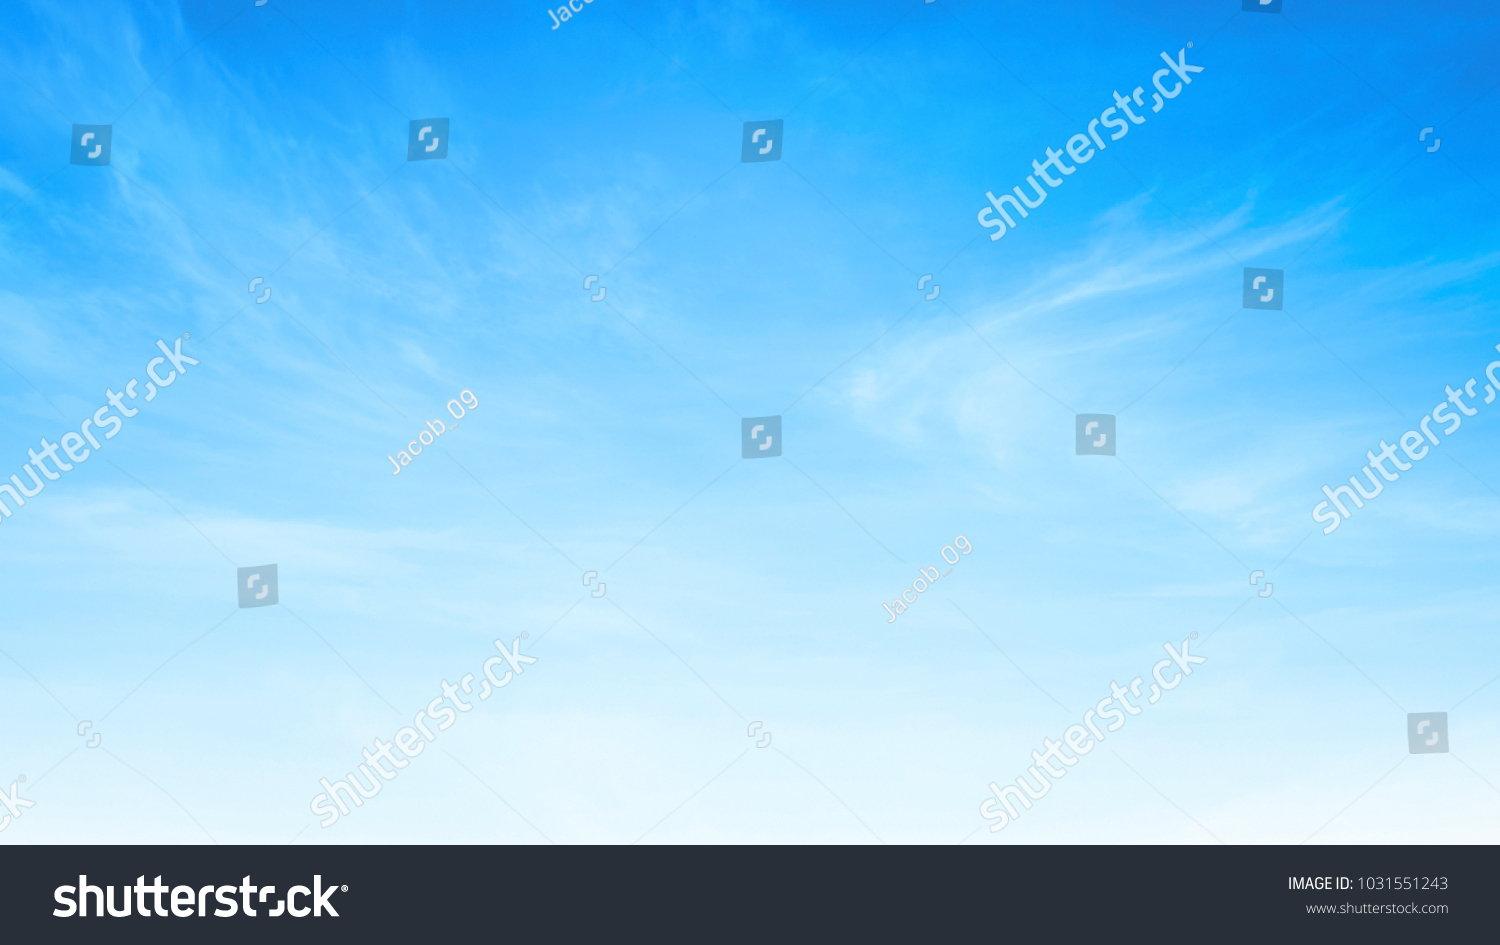 International Day for the Preservation of the Ozone Layer concept: Beauty white cloud and clear blue sky in sunny day texture background